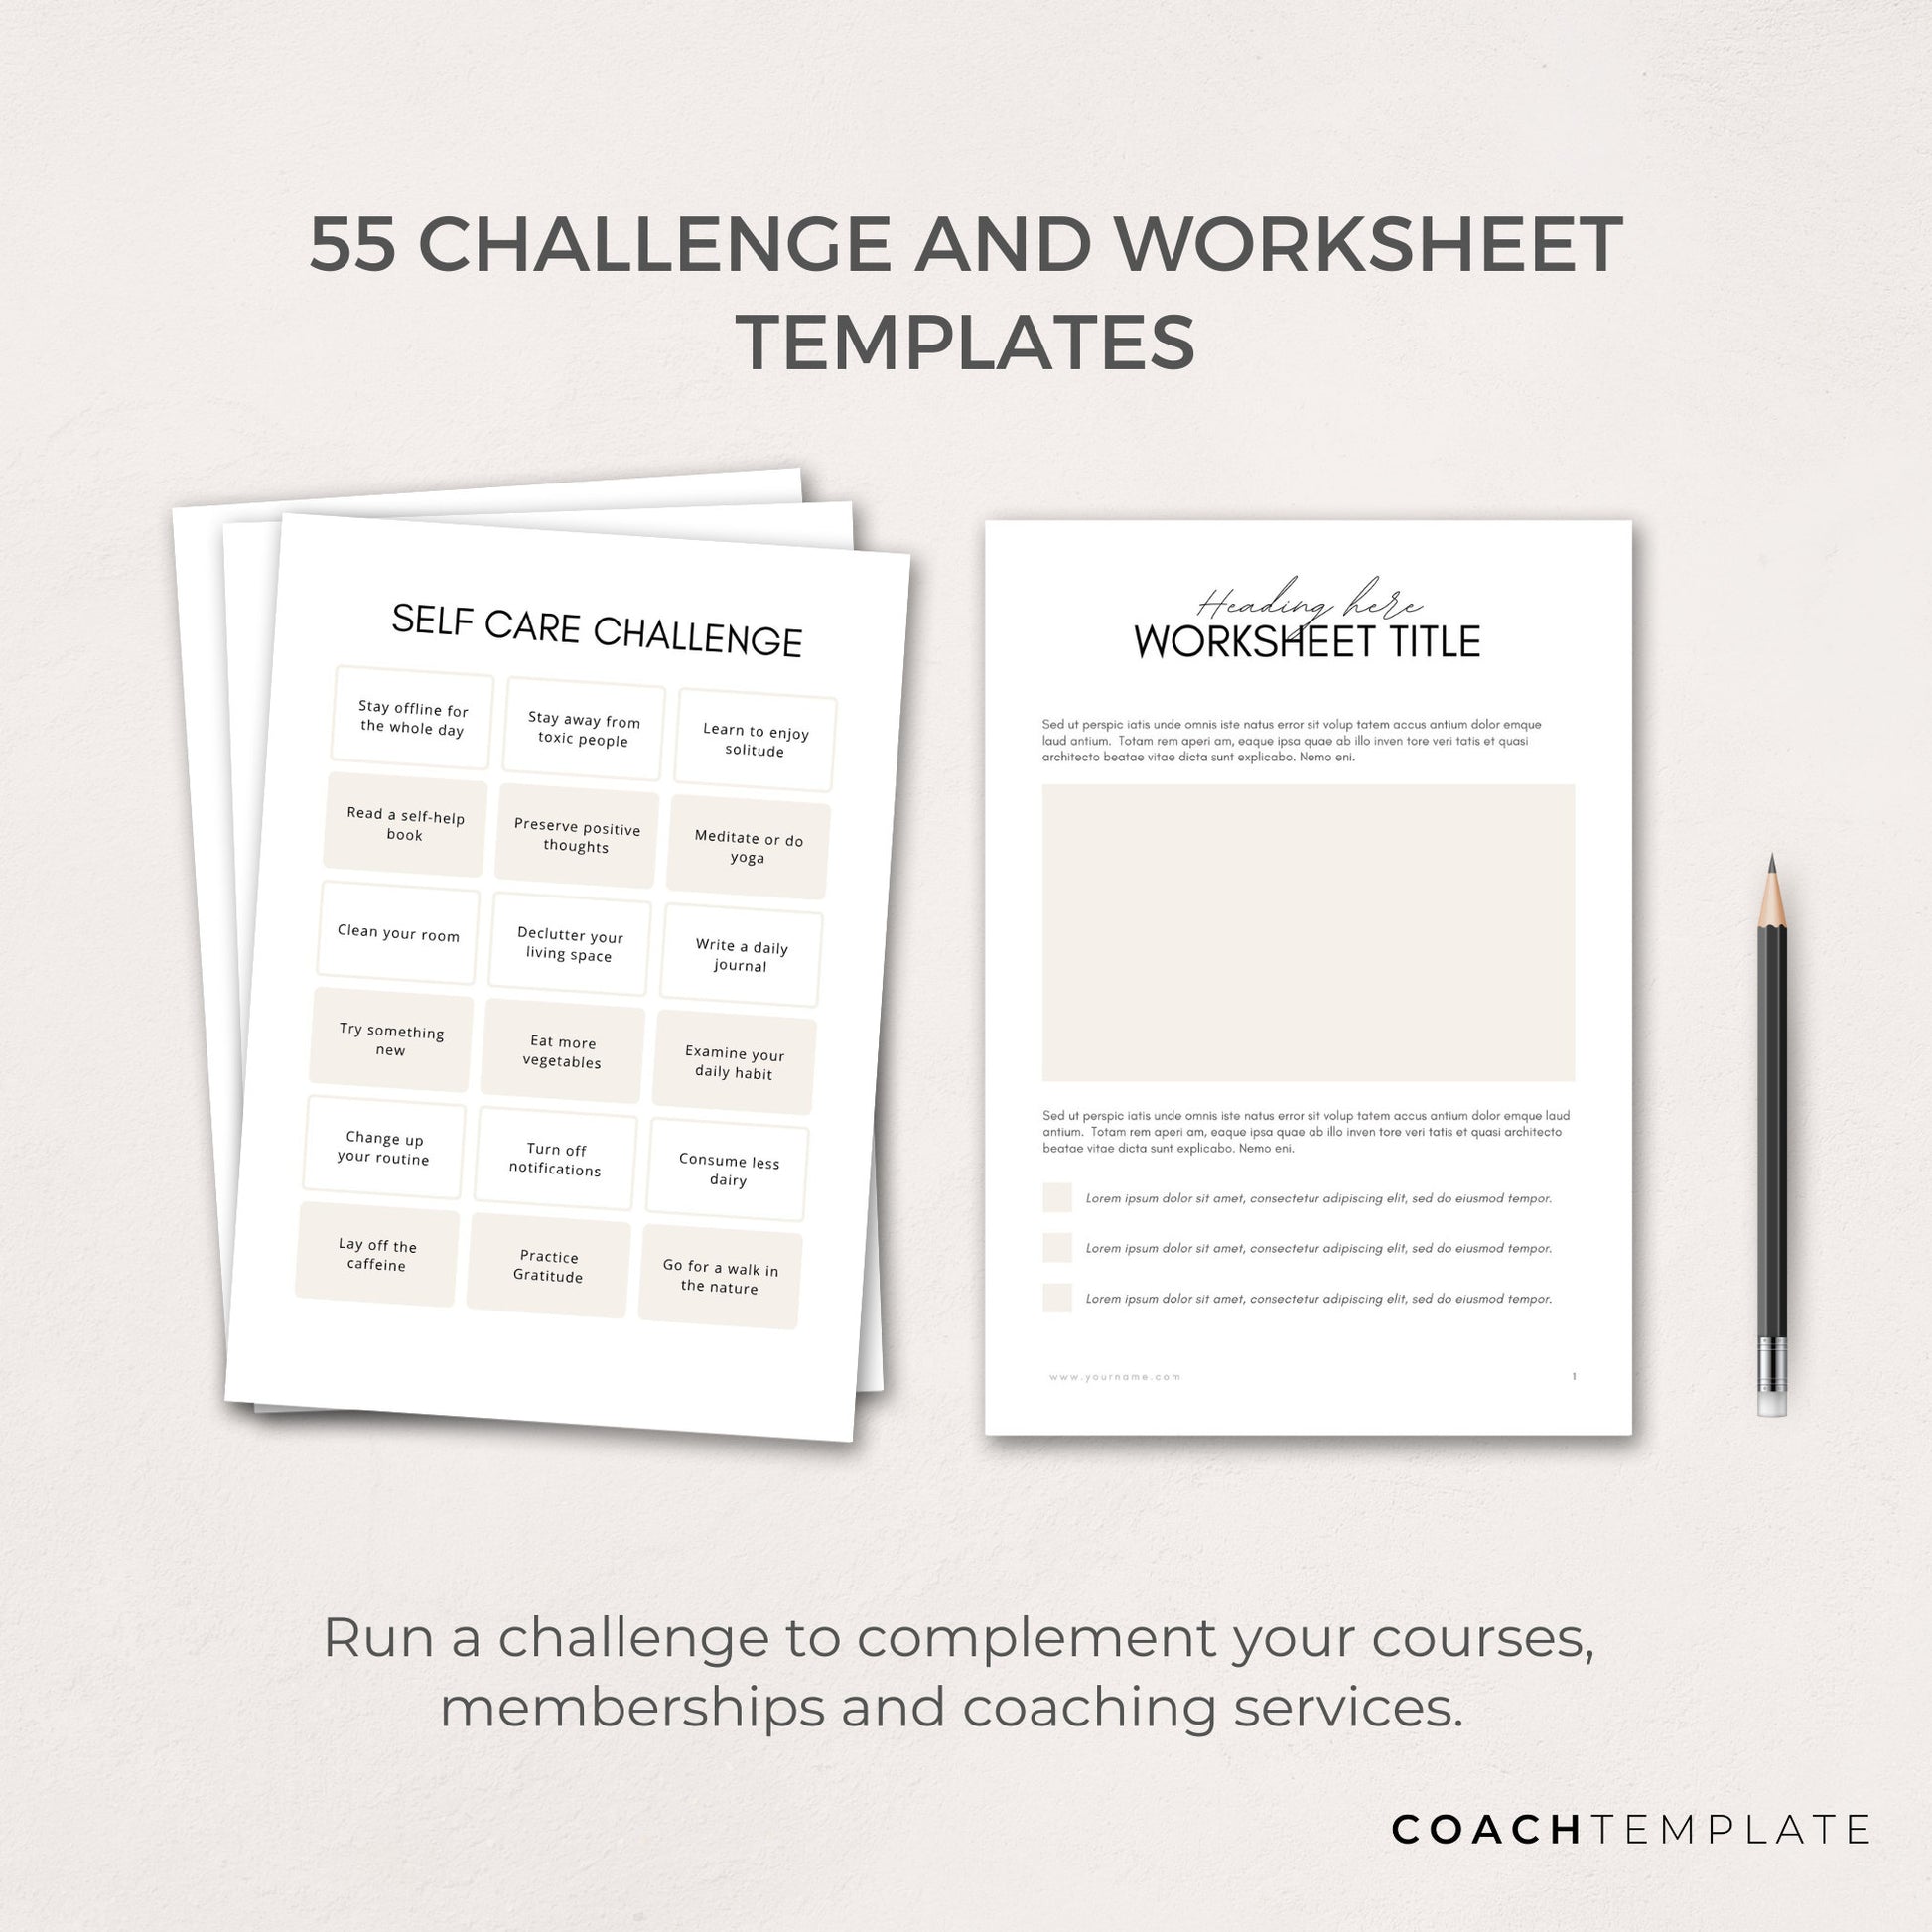 Challenge Worksheet Canva Template | Commercial Use Workbook Lead Magnet for Life Wellness Coach Spiritual business course content creator - CoachTemplate.com 30CTCW

Canva templates to help you create a challenge for your coaching business.